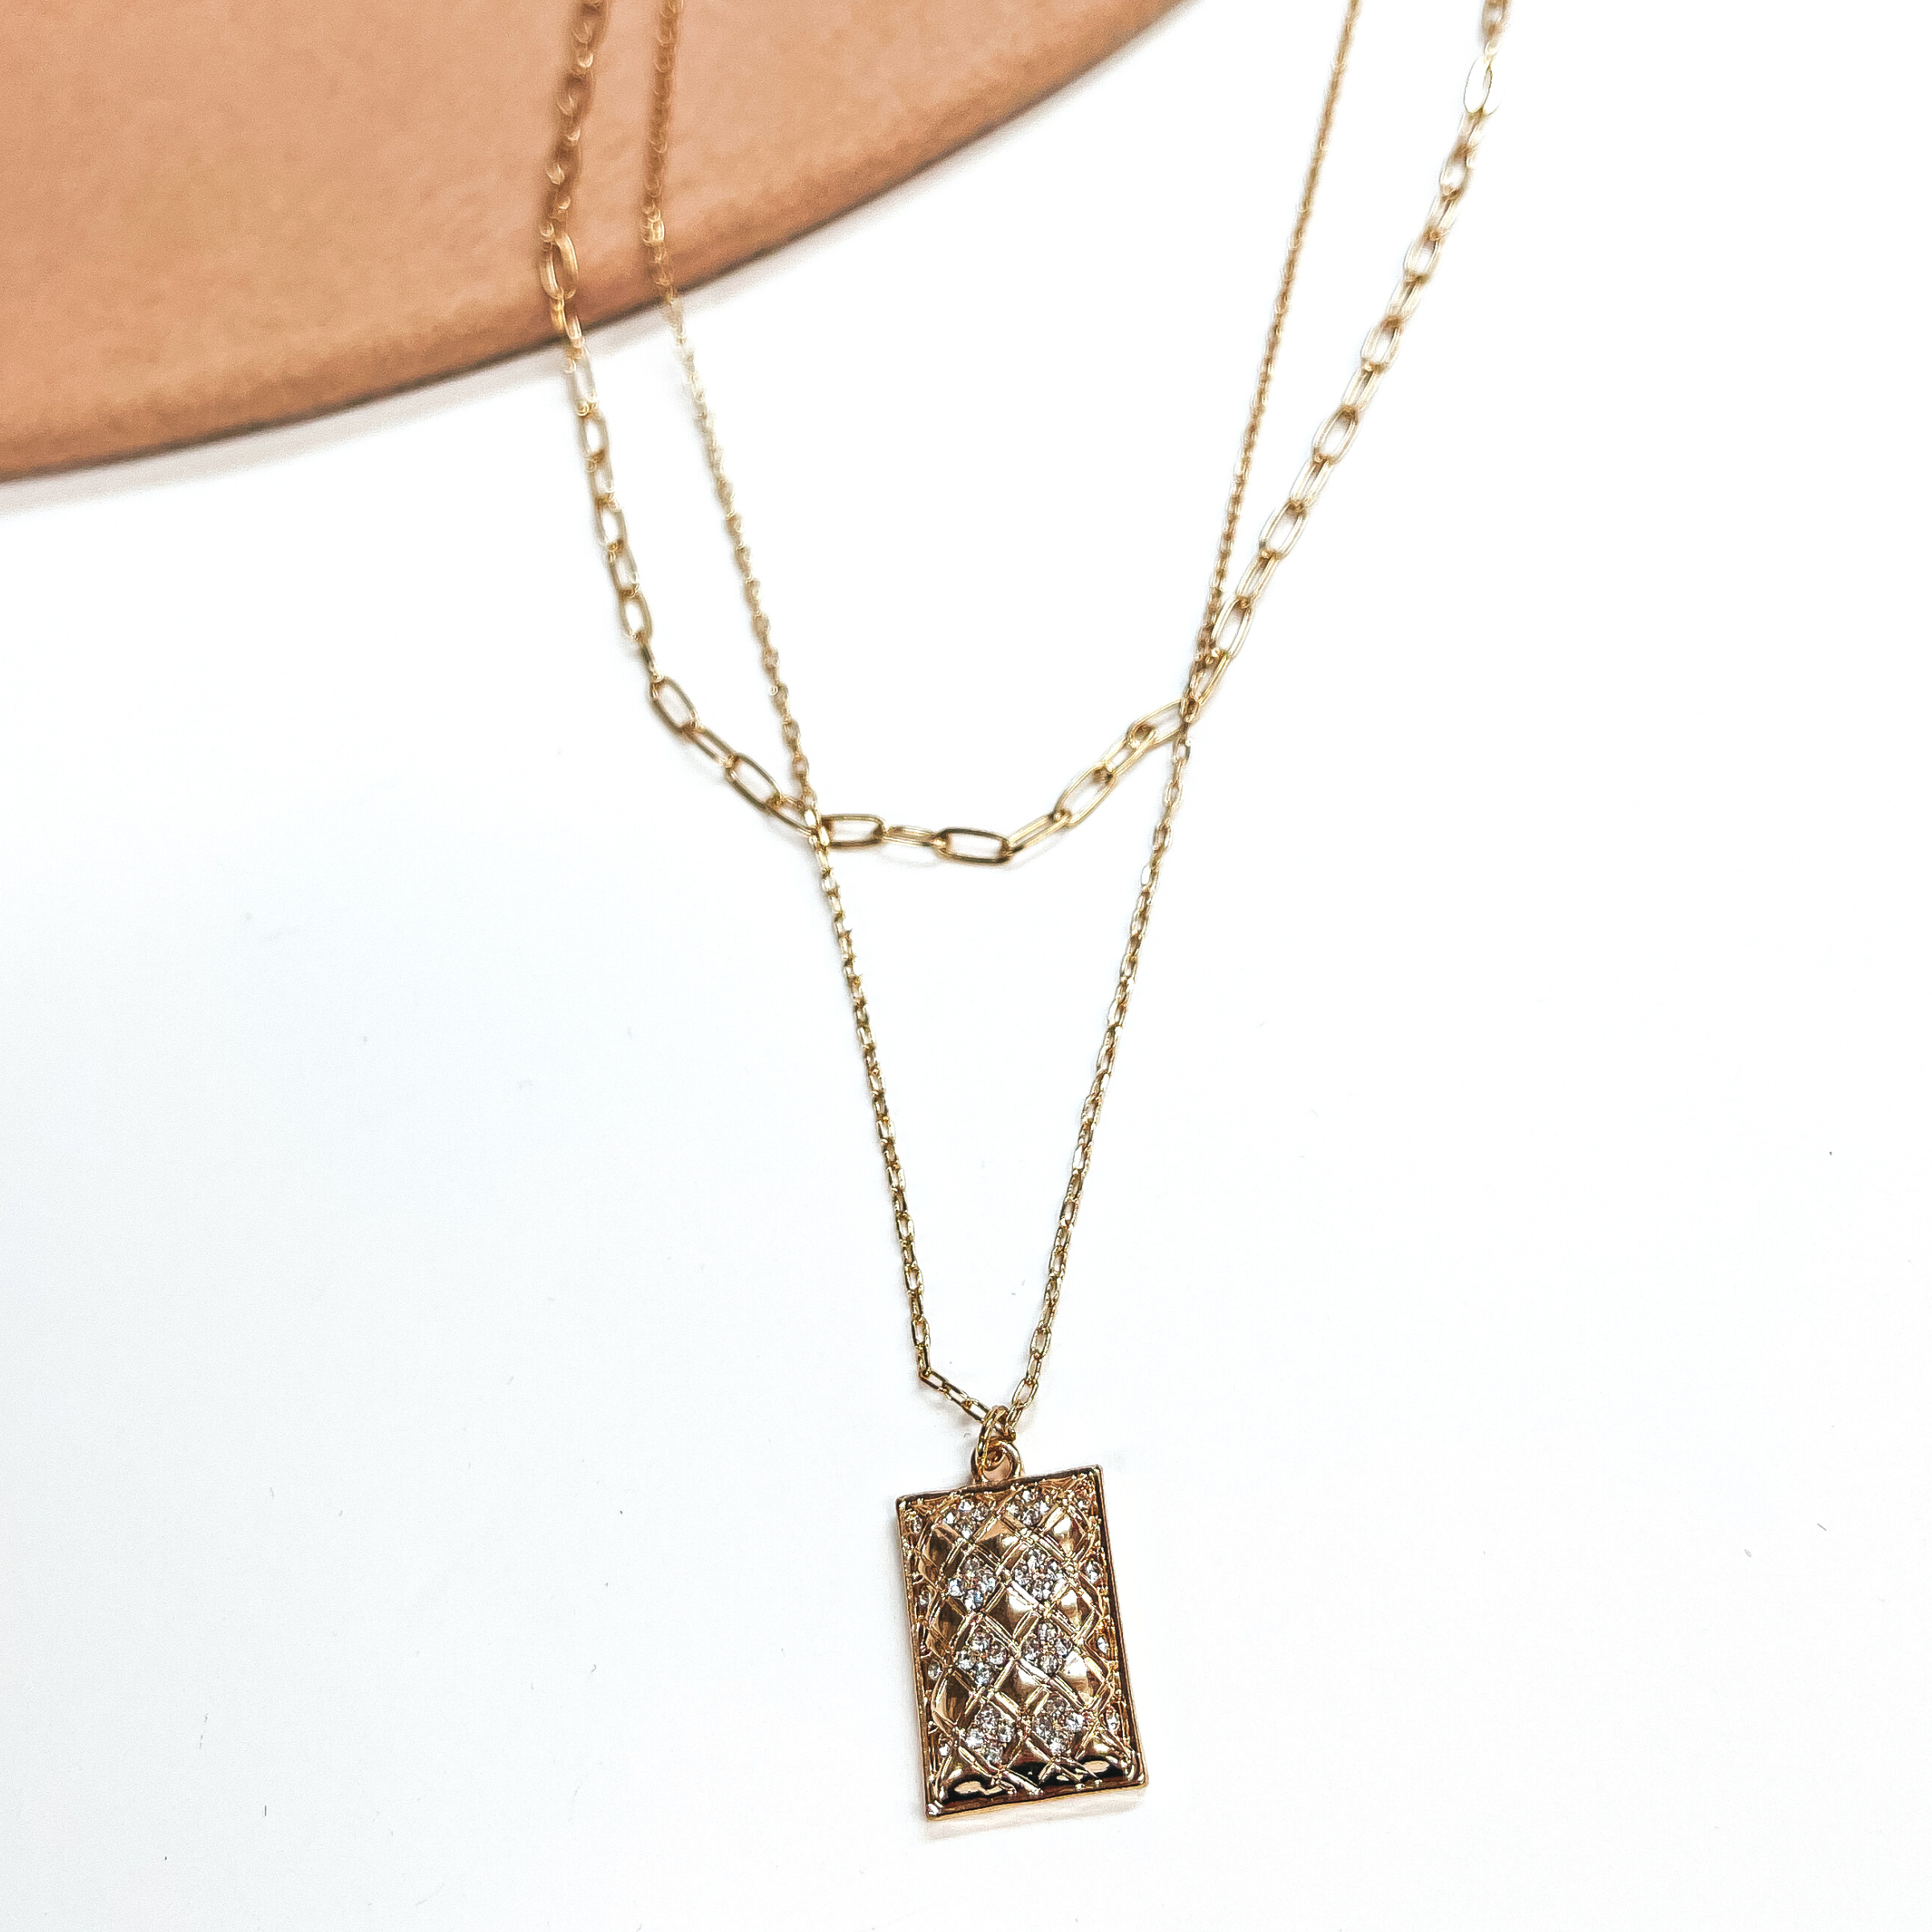 Two Strand Multi Chain Necklace with Rectangle Crystal Pendant in Gold - Giddy Up Glamour Boutique